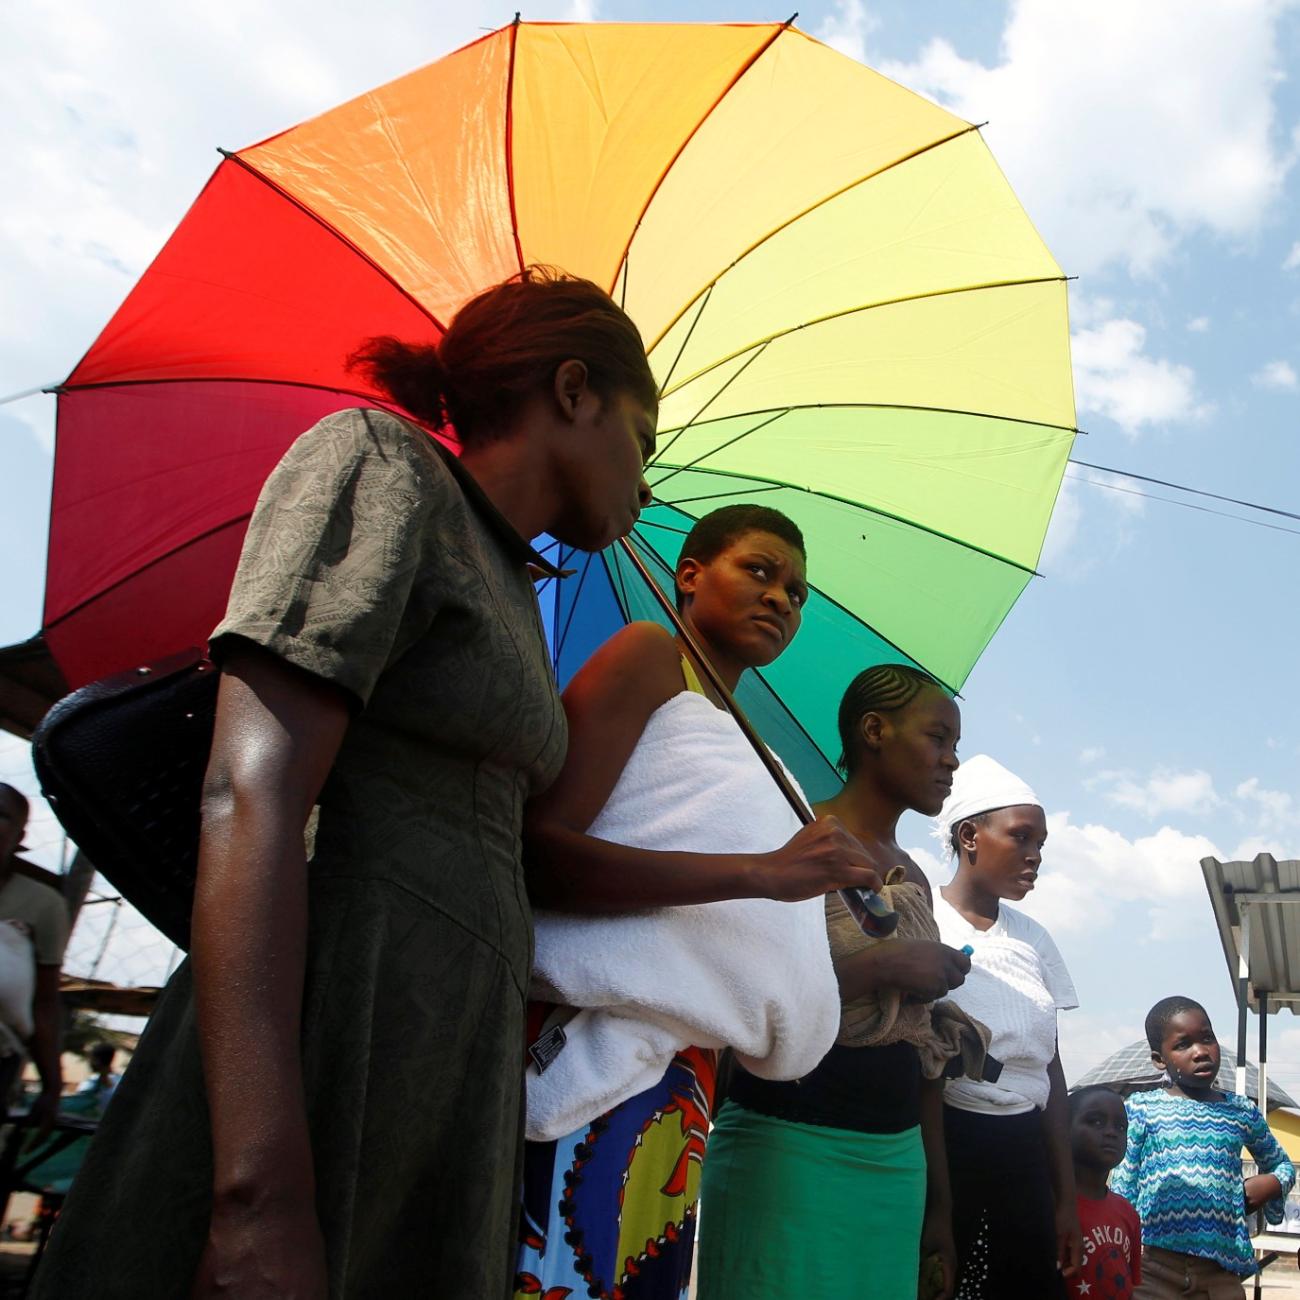 Residents queue to receive cholera vaccinations at a clinic in Harare, Zimbabwe, on October 4, 2018.